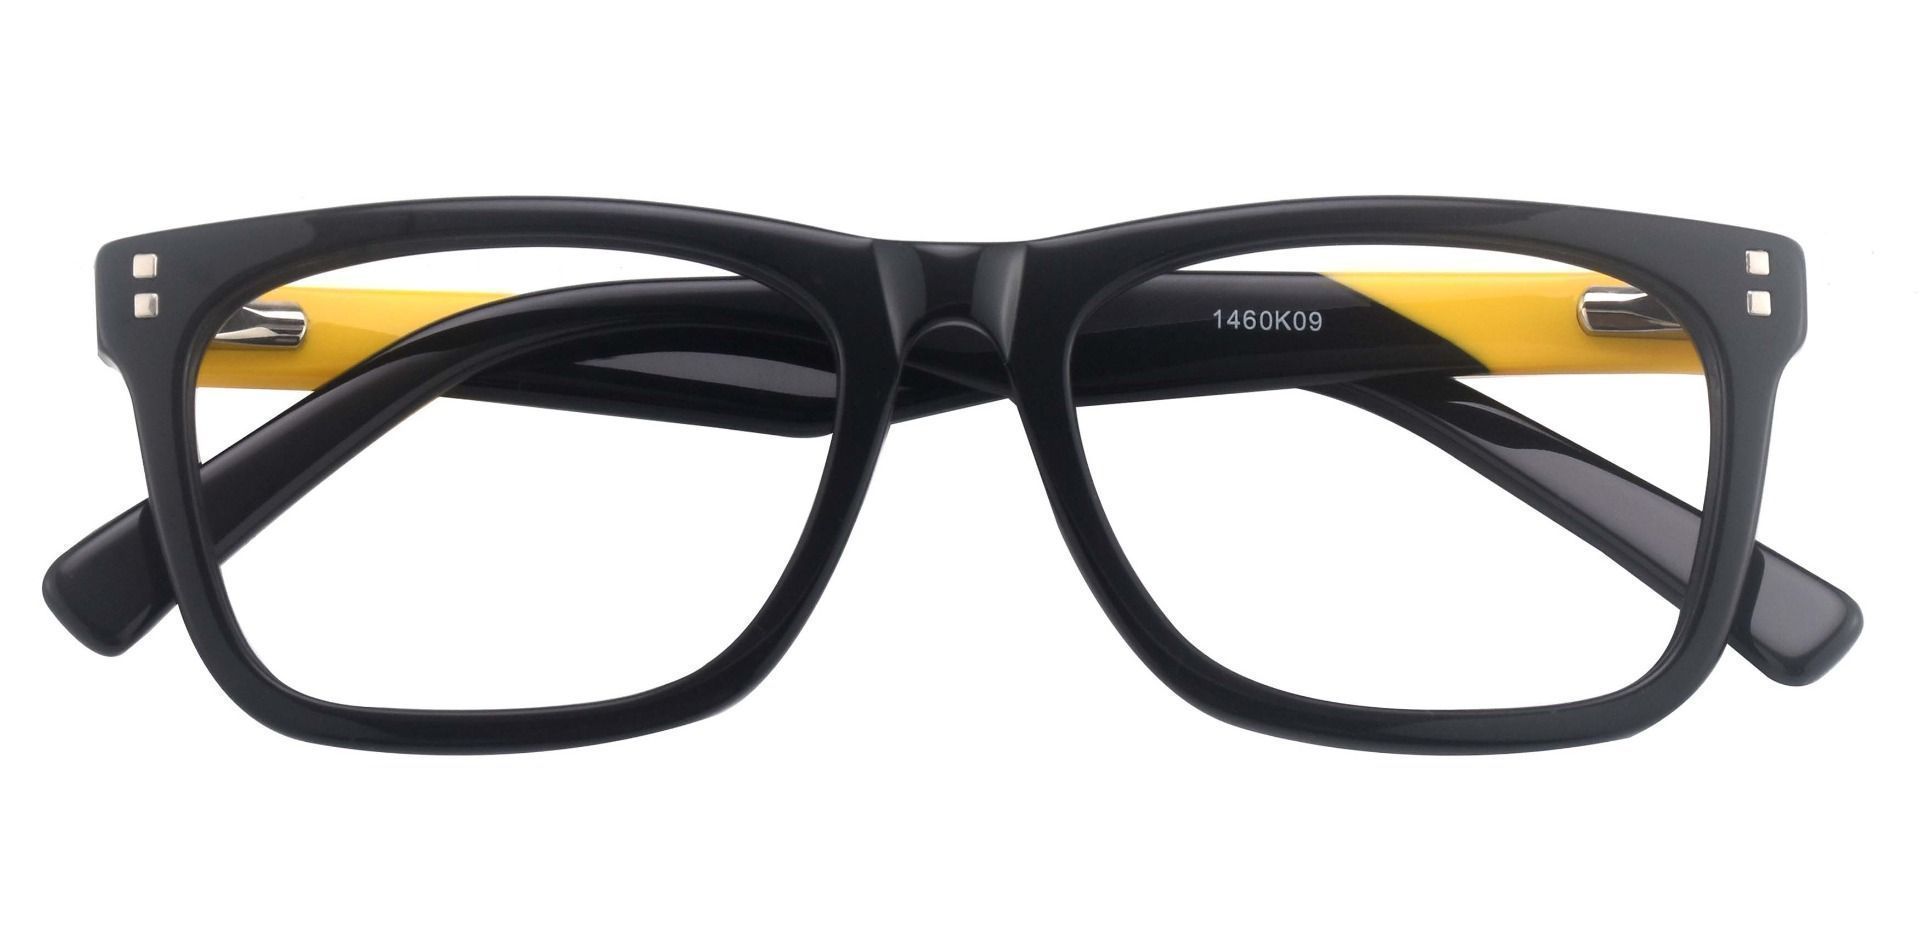 Liberty Rectangle Blue Light Blocking Glasses - The Frame Is Black And Gold